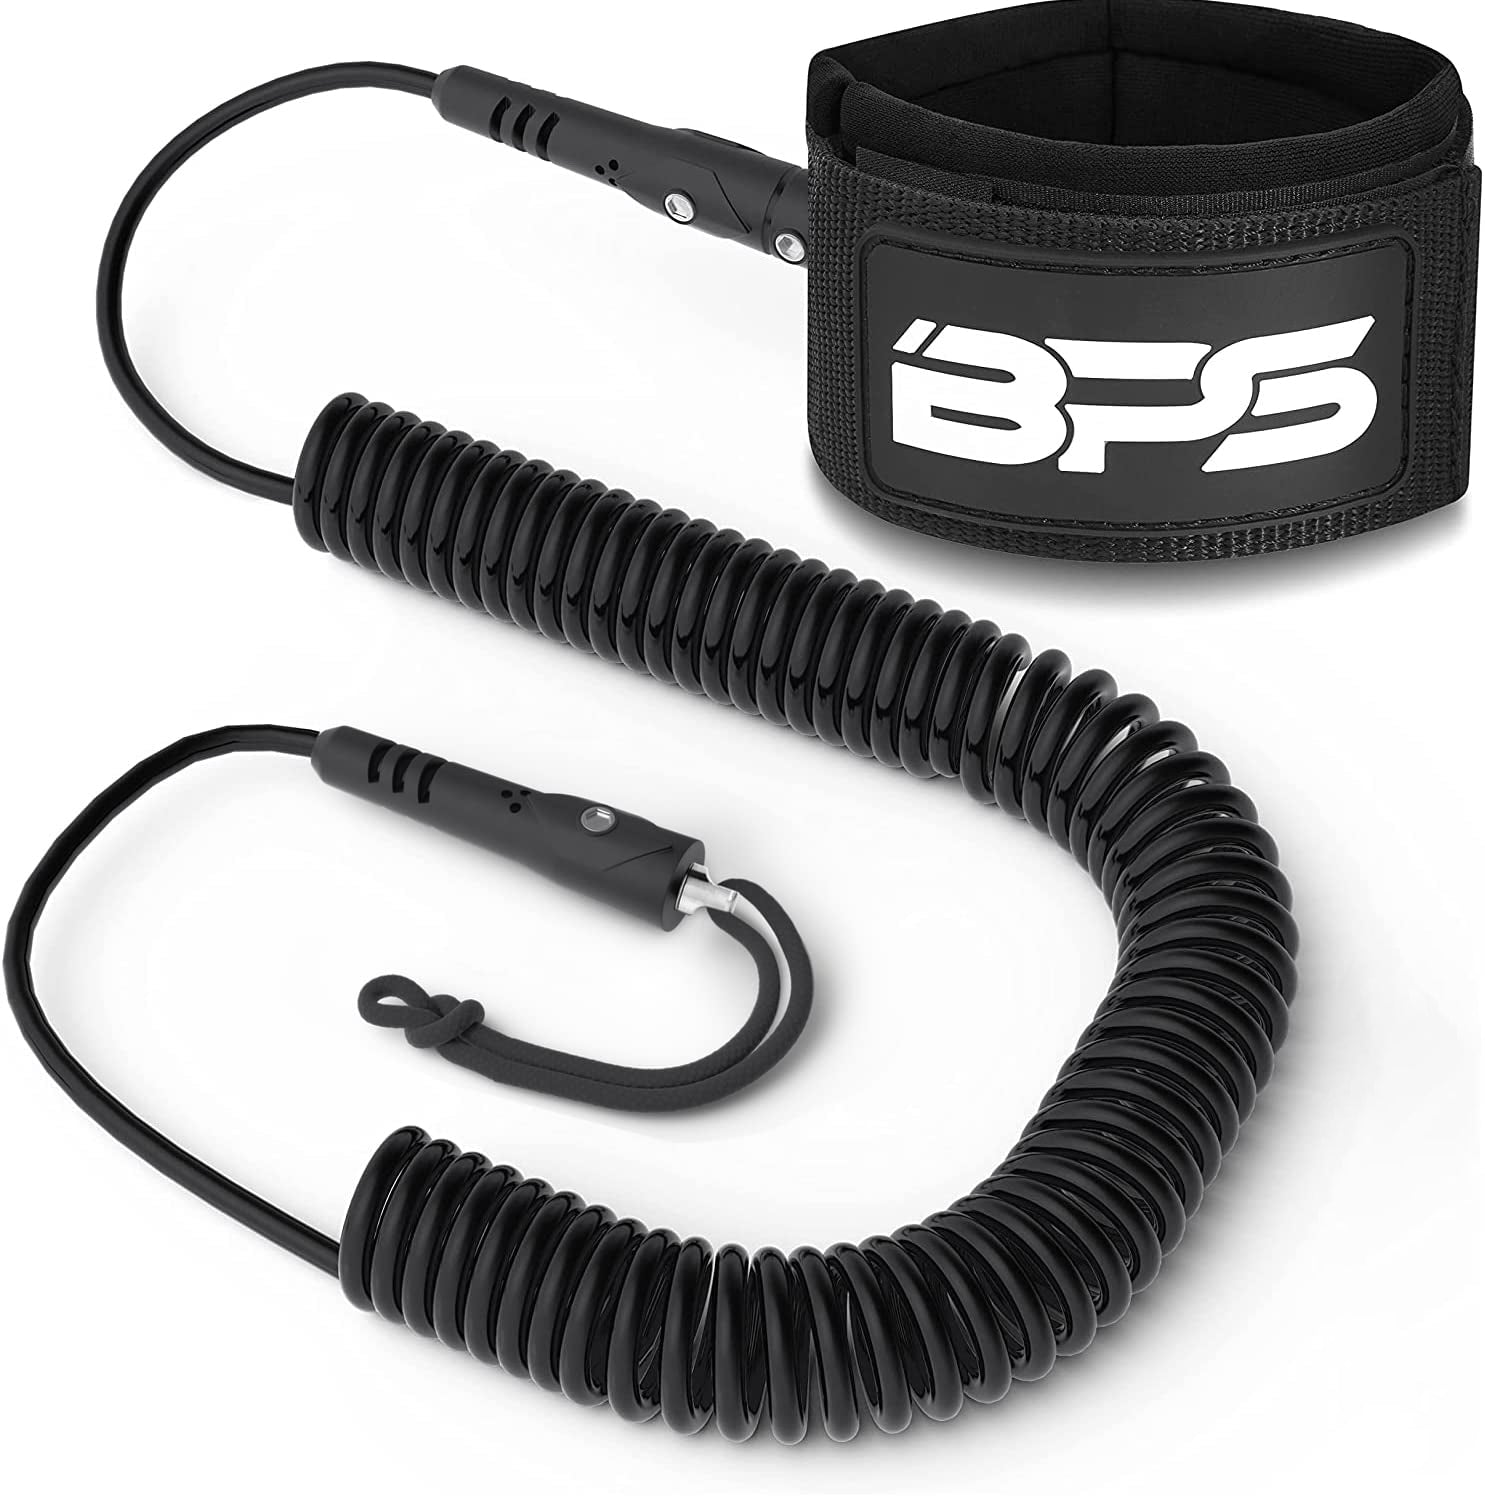 BPS 'Ultralite' 10' SUP Coiled Leash